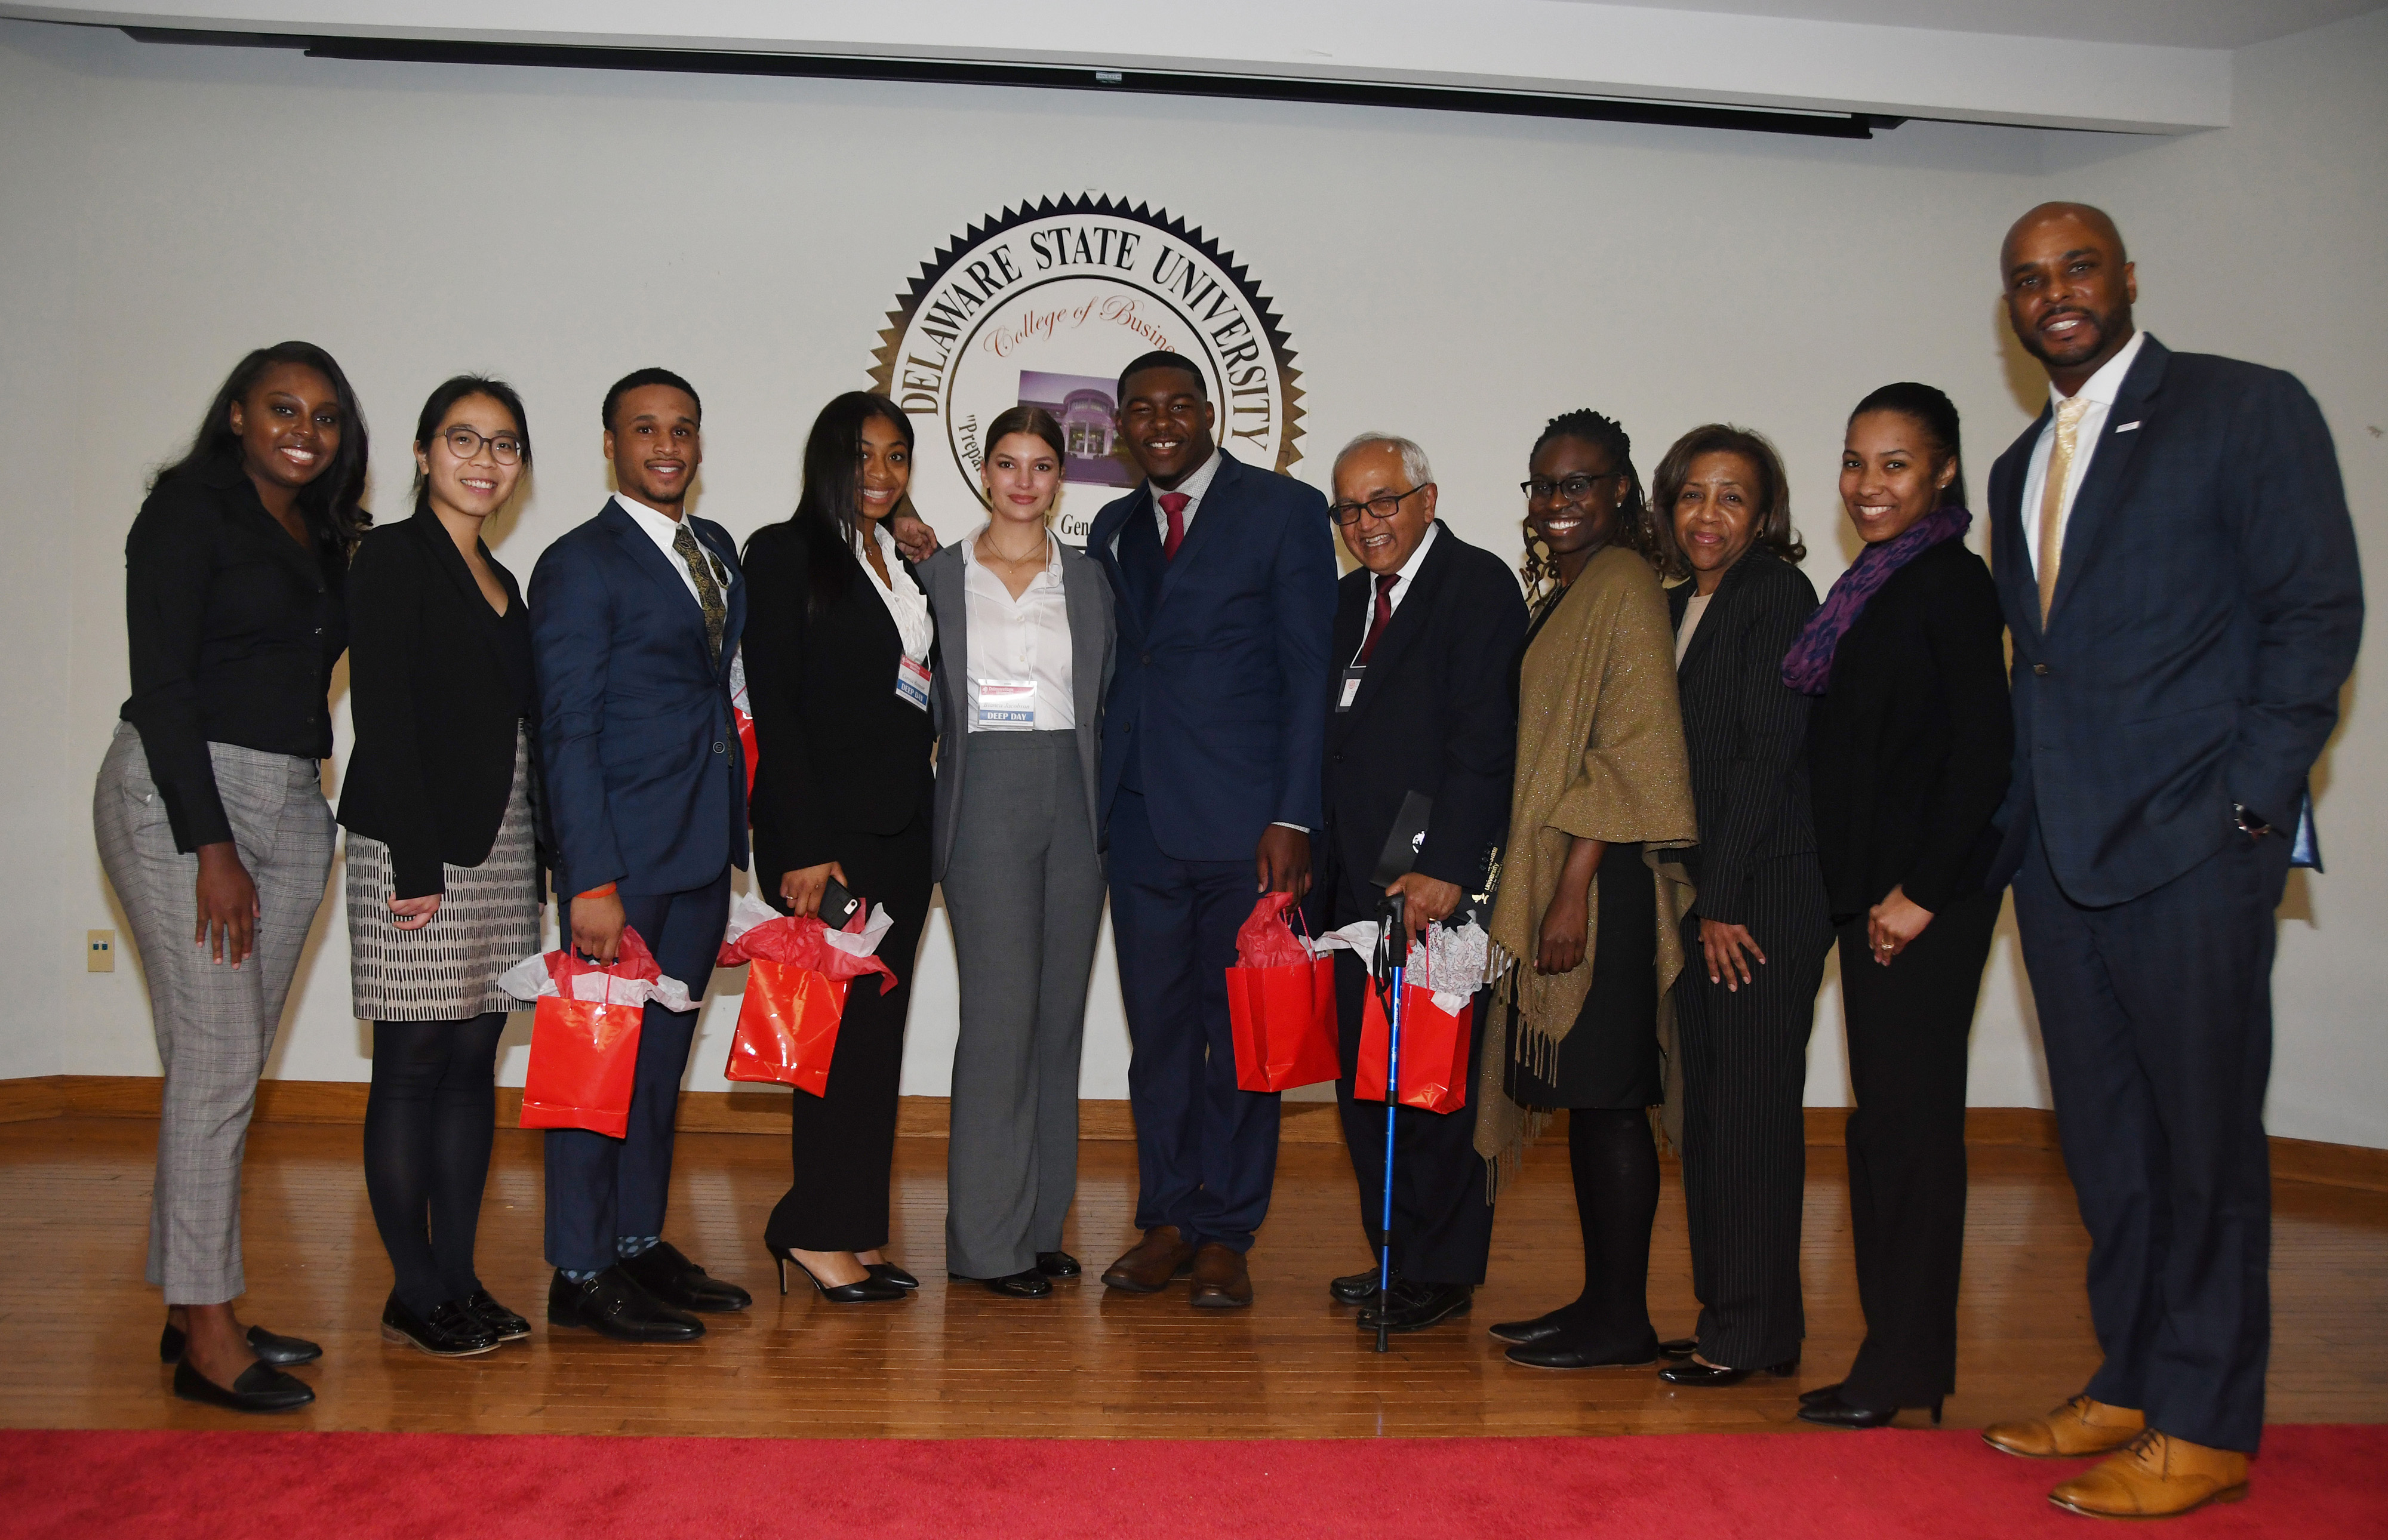 The Gates visitors pose with the Project LEAD Business Case Competition winners during the College of Business' Deep Day. (L-r) Gates team members, Lillian Williams and Julie Ngyuen; students Chris Whitney-Smith, Coreia Benson, Bianca Jacobson and Tysun Hicks, advisor Dr. Chandrakant P. Ganatra; and American Institute for Research members Deaweh Benson, Dr. Kathy Thompson and Dr. Montrisha Williams, along with Acting Dean Michael Casson Jr.